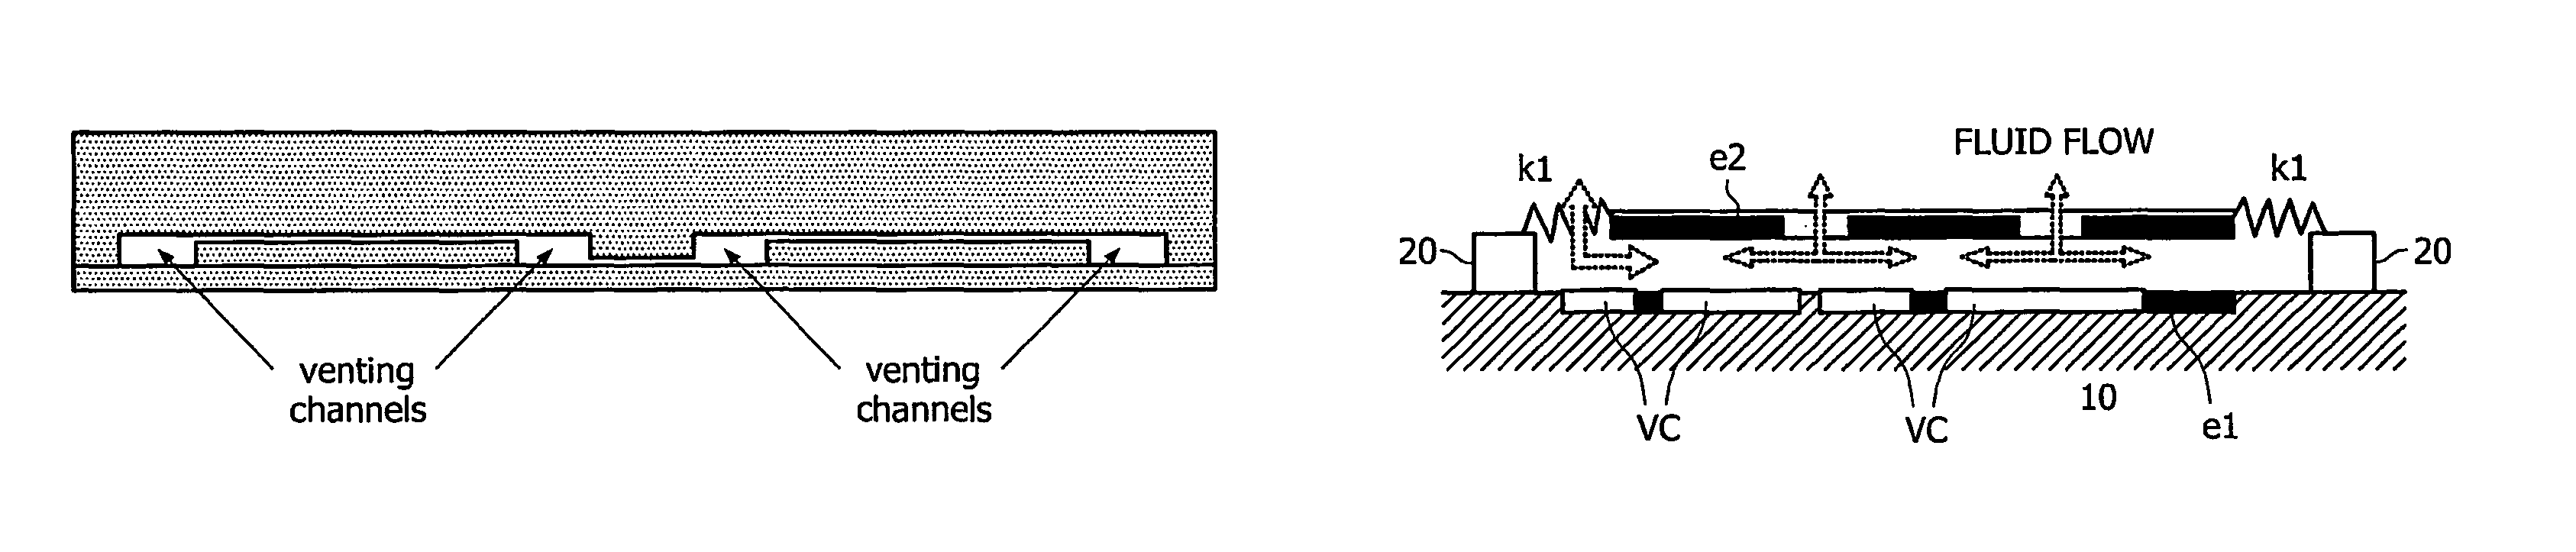 Reduction of air damping in MEMS device